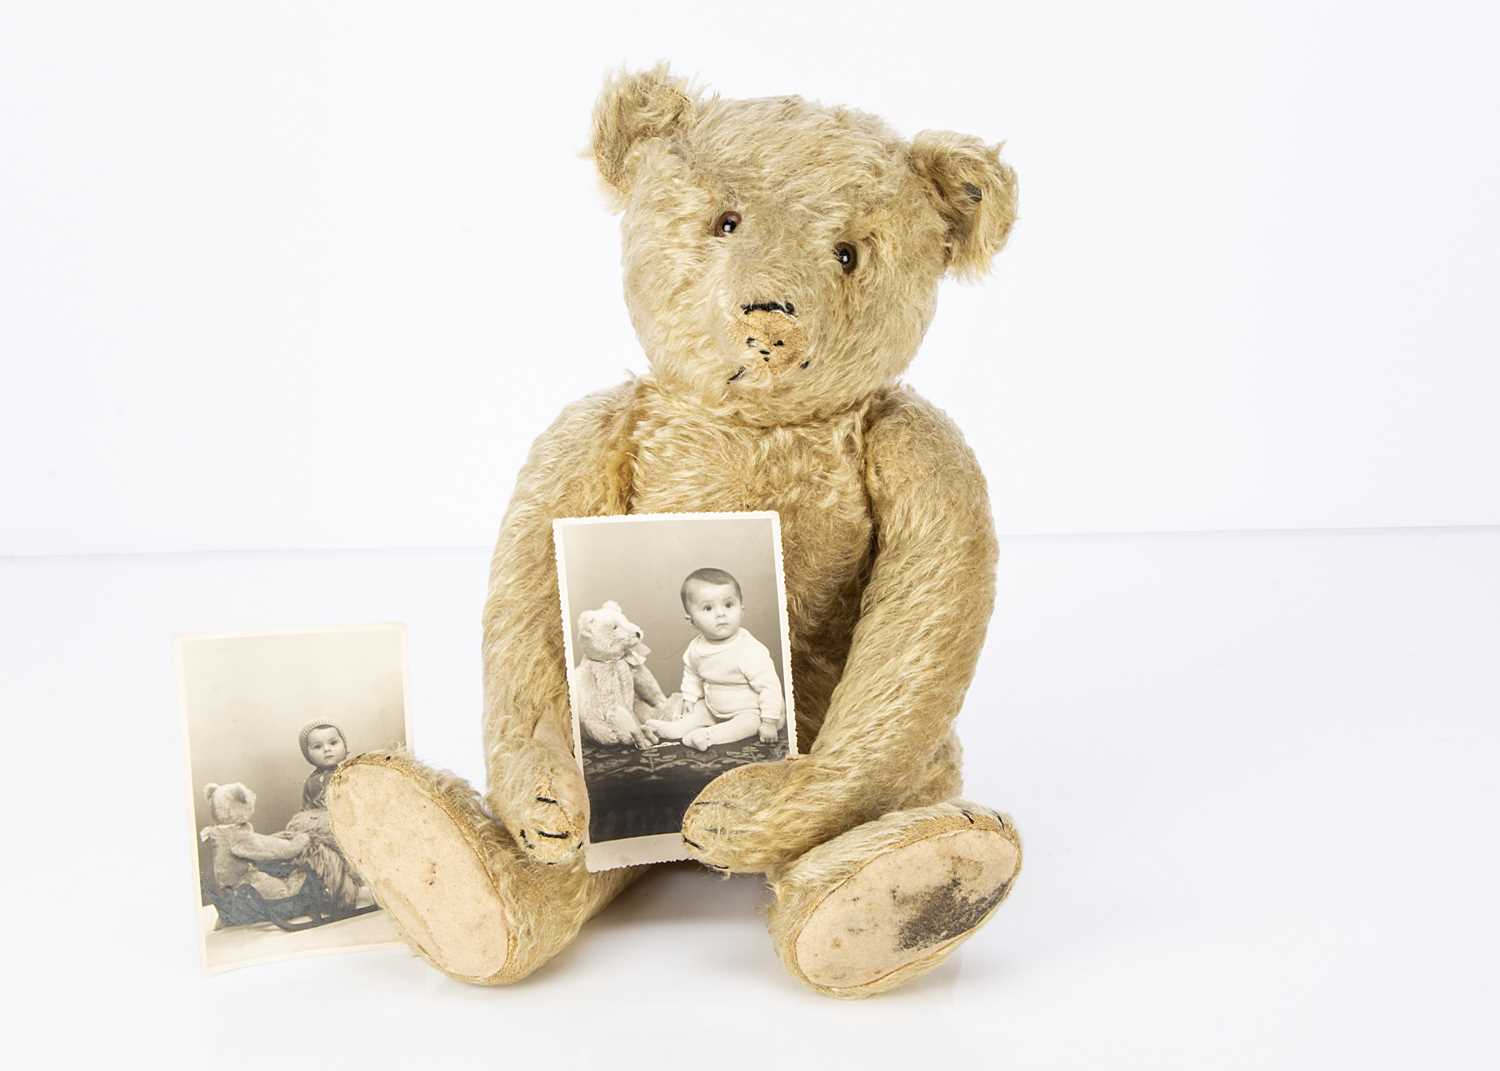 Lot 618 - A 1930s Steiff Teddy Bear with family provenance including escaping during WW2 from Austria and photographs